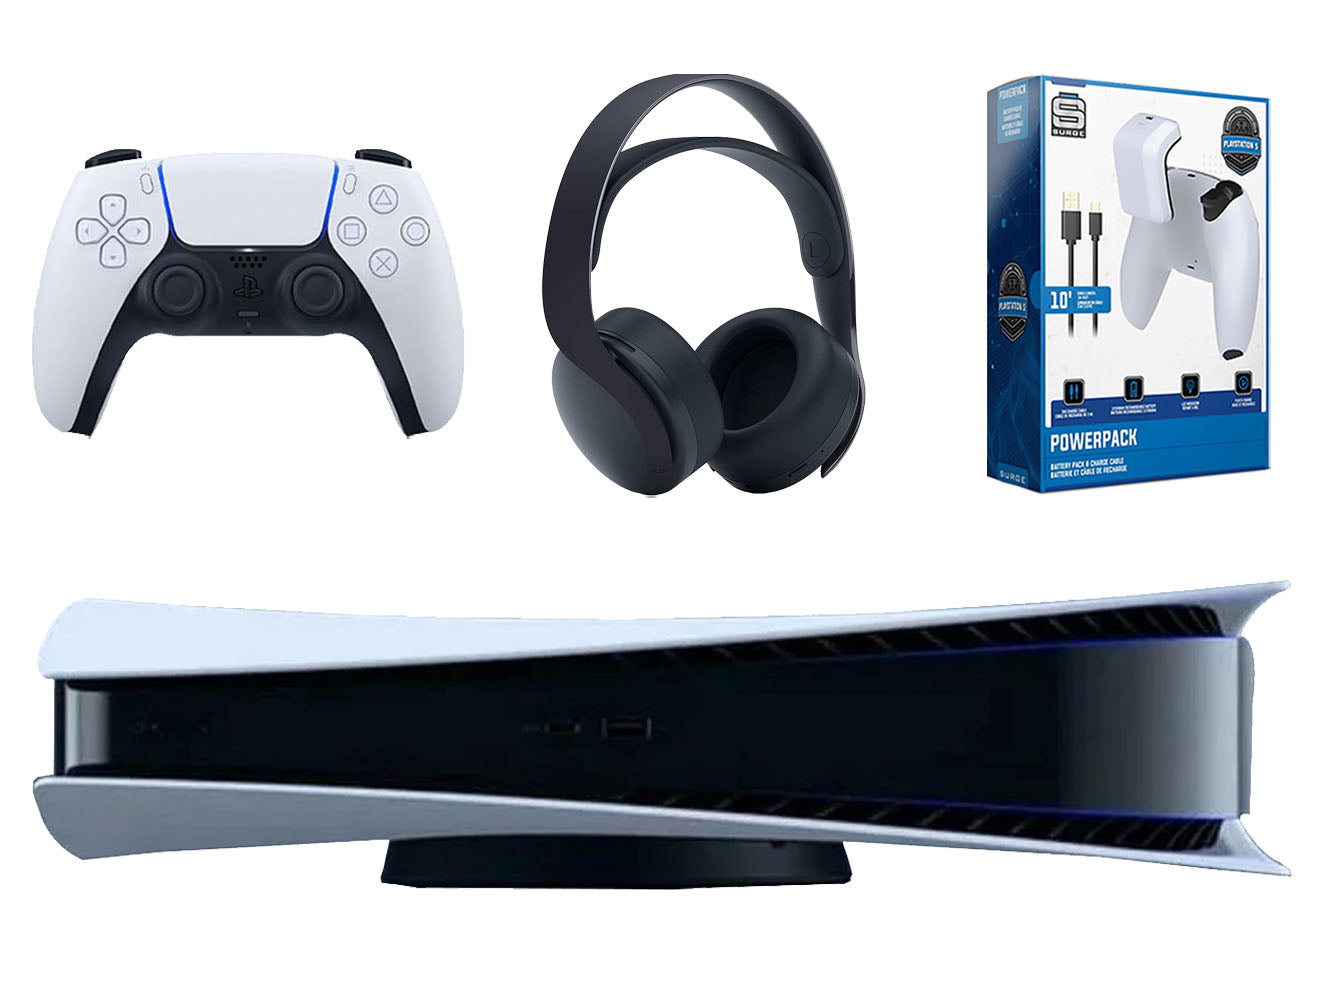 Sony Playstation 5 Digital Edition Console with Black PULSE 3D Wireless Gaming Headset and Surge PowerPack PS5 Battery Pack & Charge Cable - Pro-Distributing